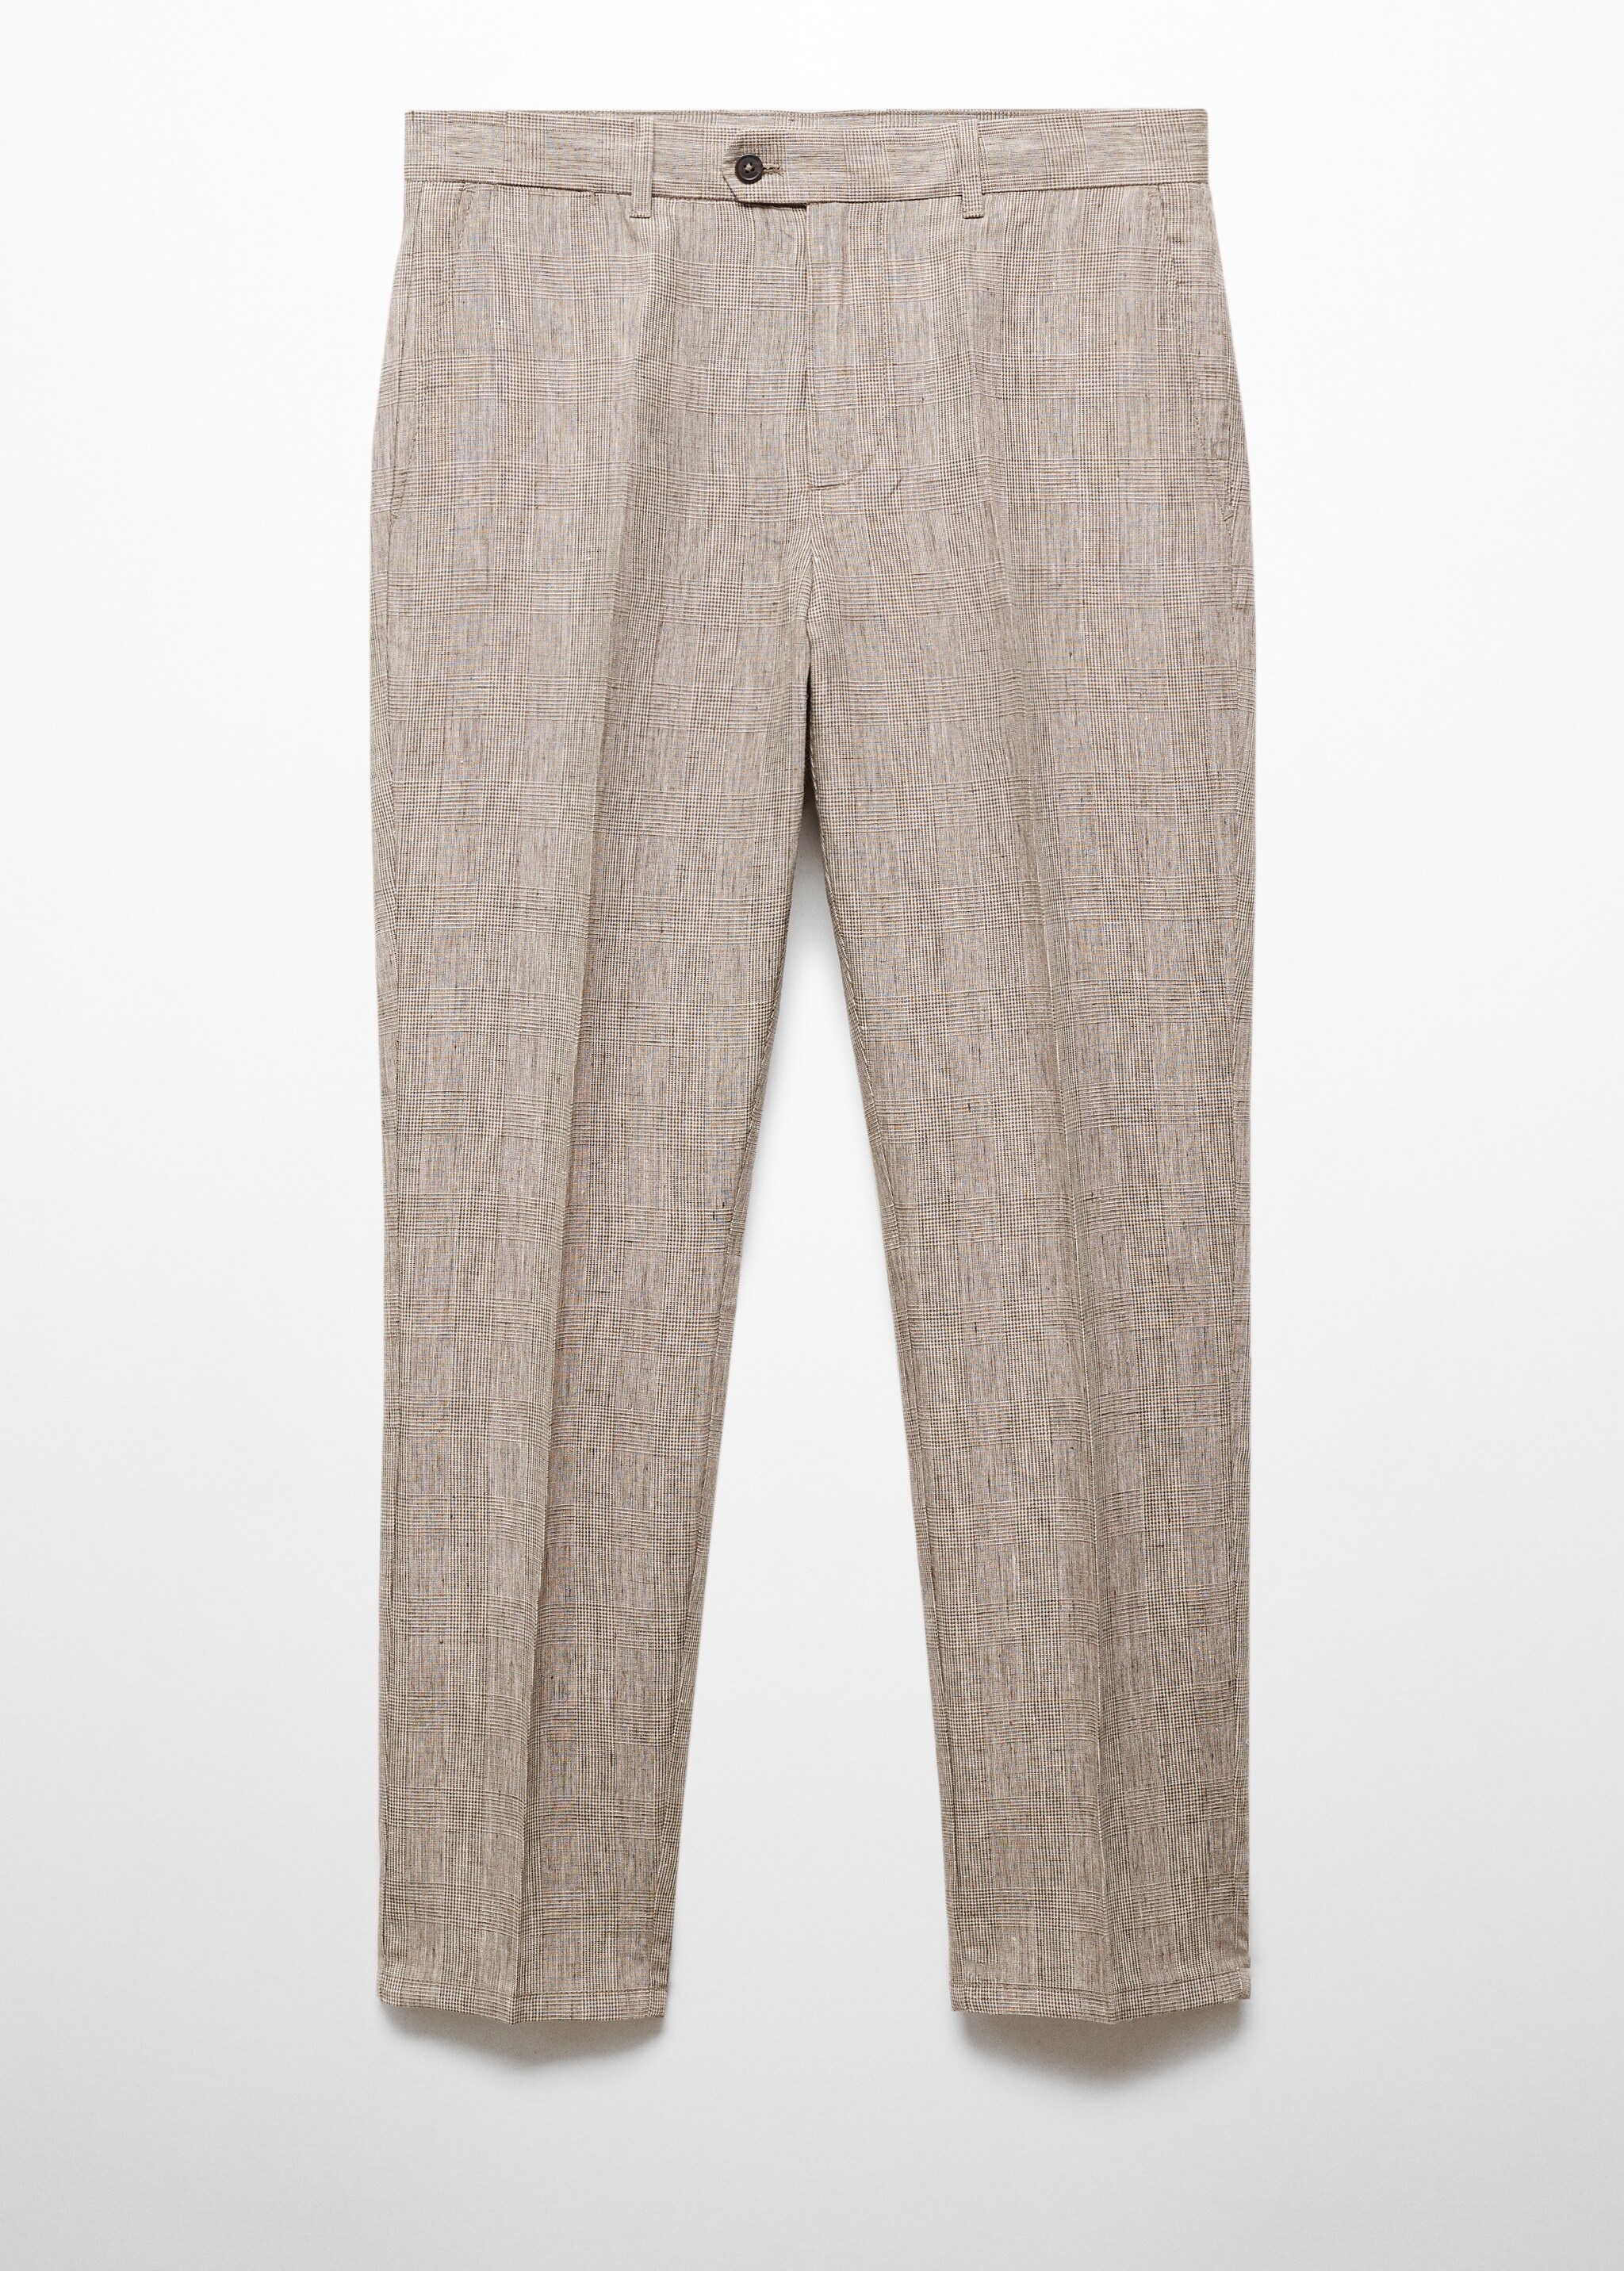 100% linen Prince of Wales check trousers - Article without model